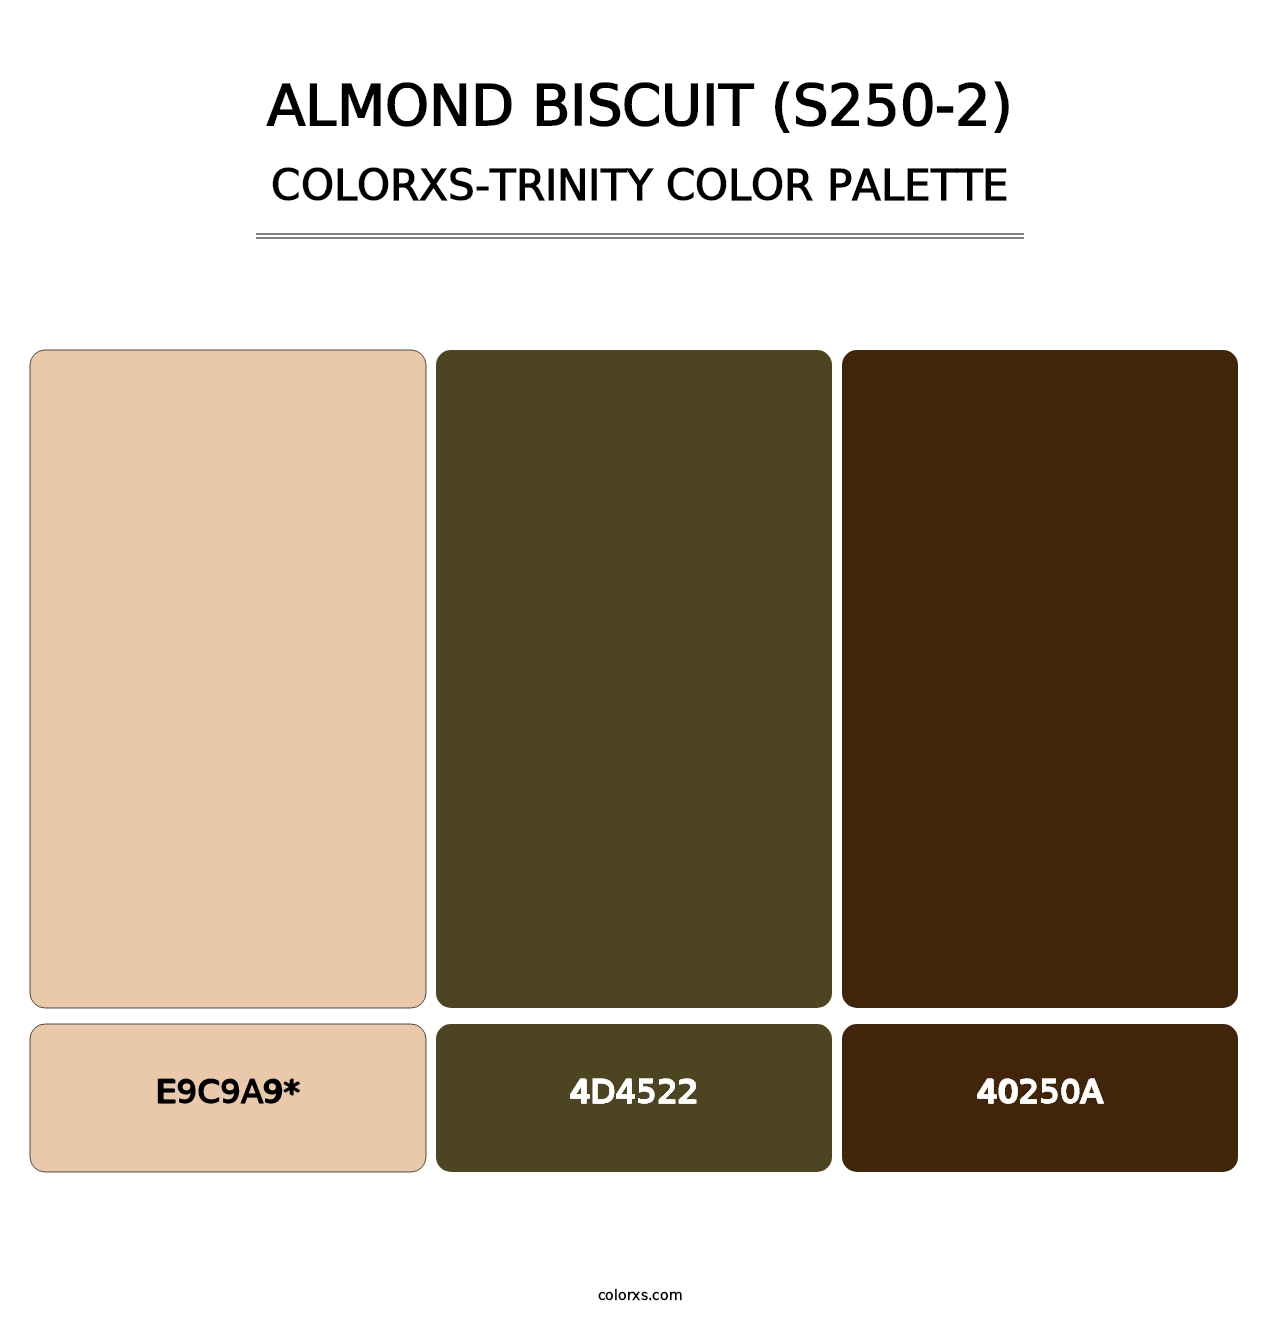 Almond Biscuit (S250-2) - Colorxs Trinity Palette